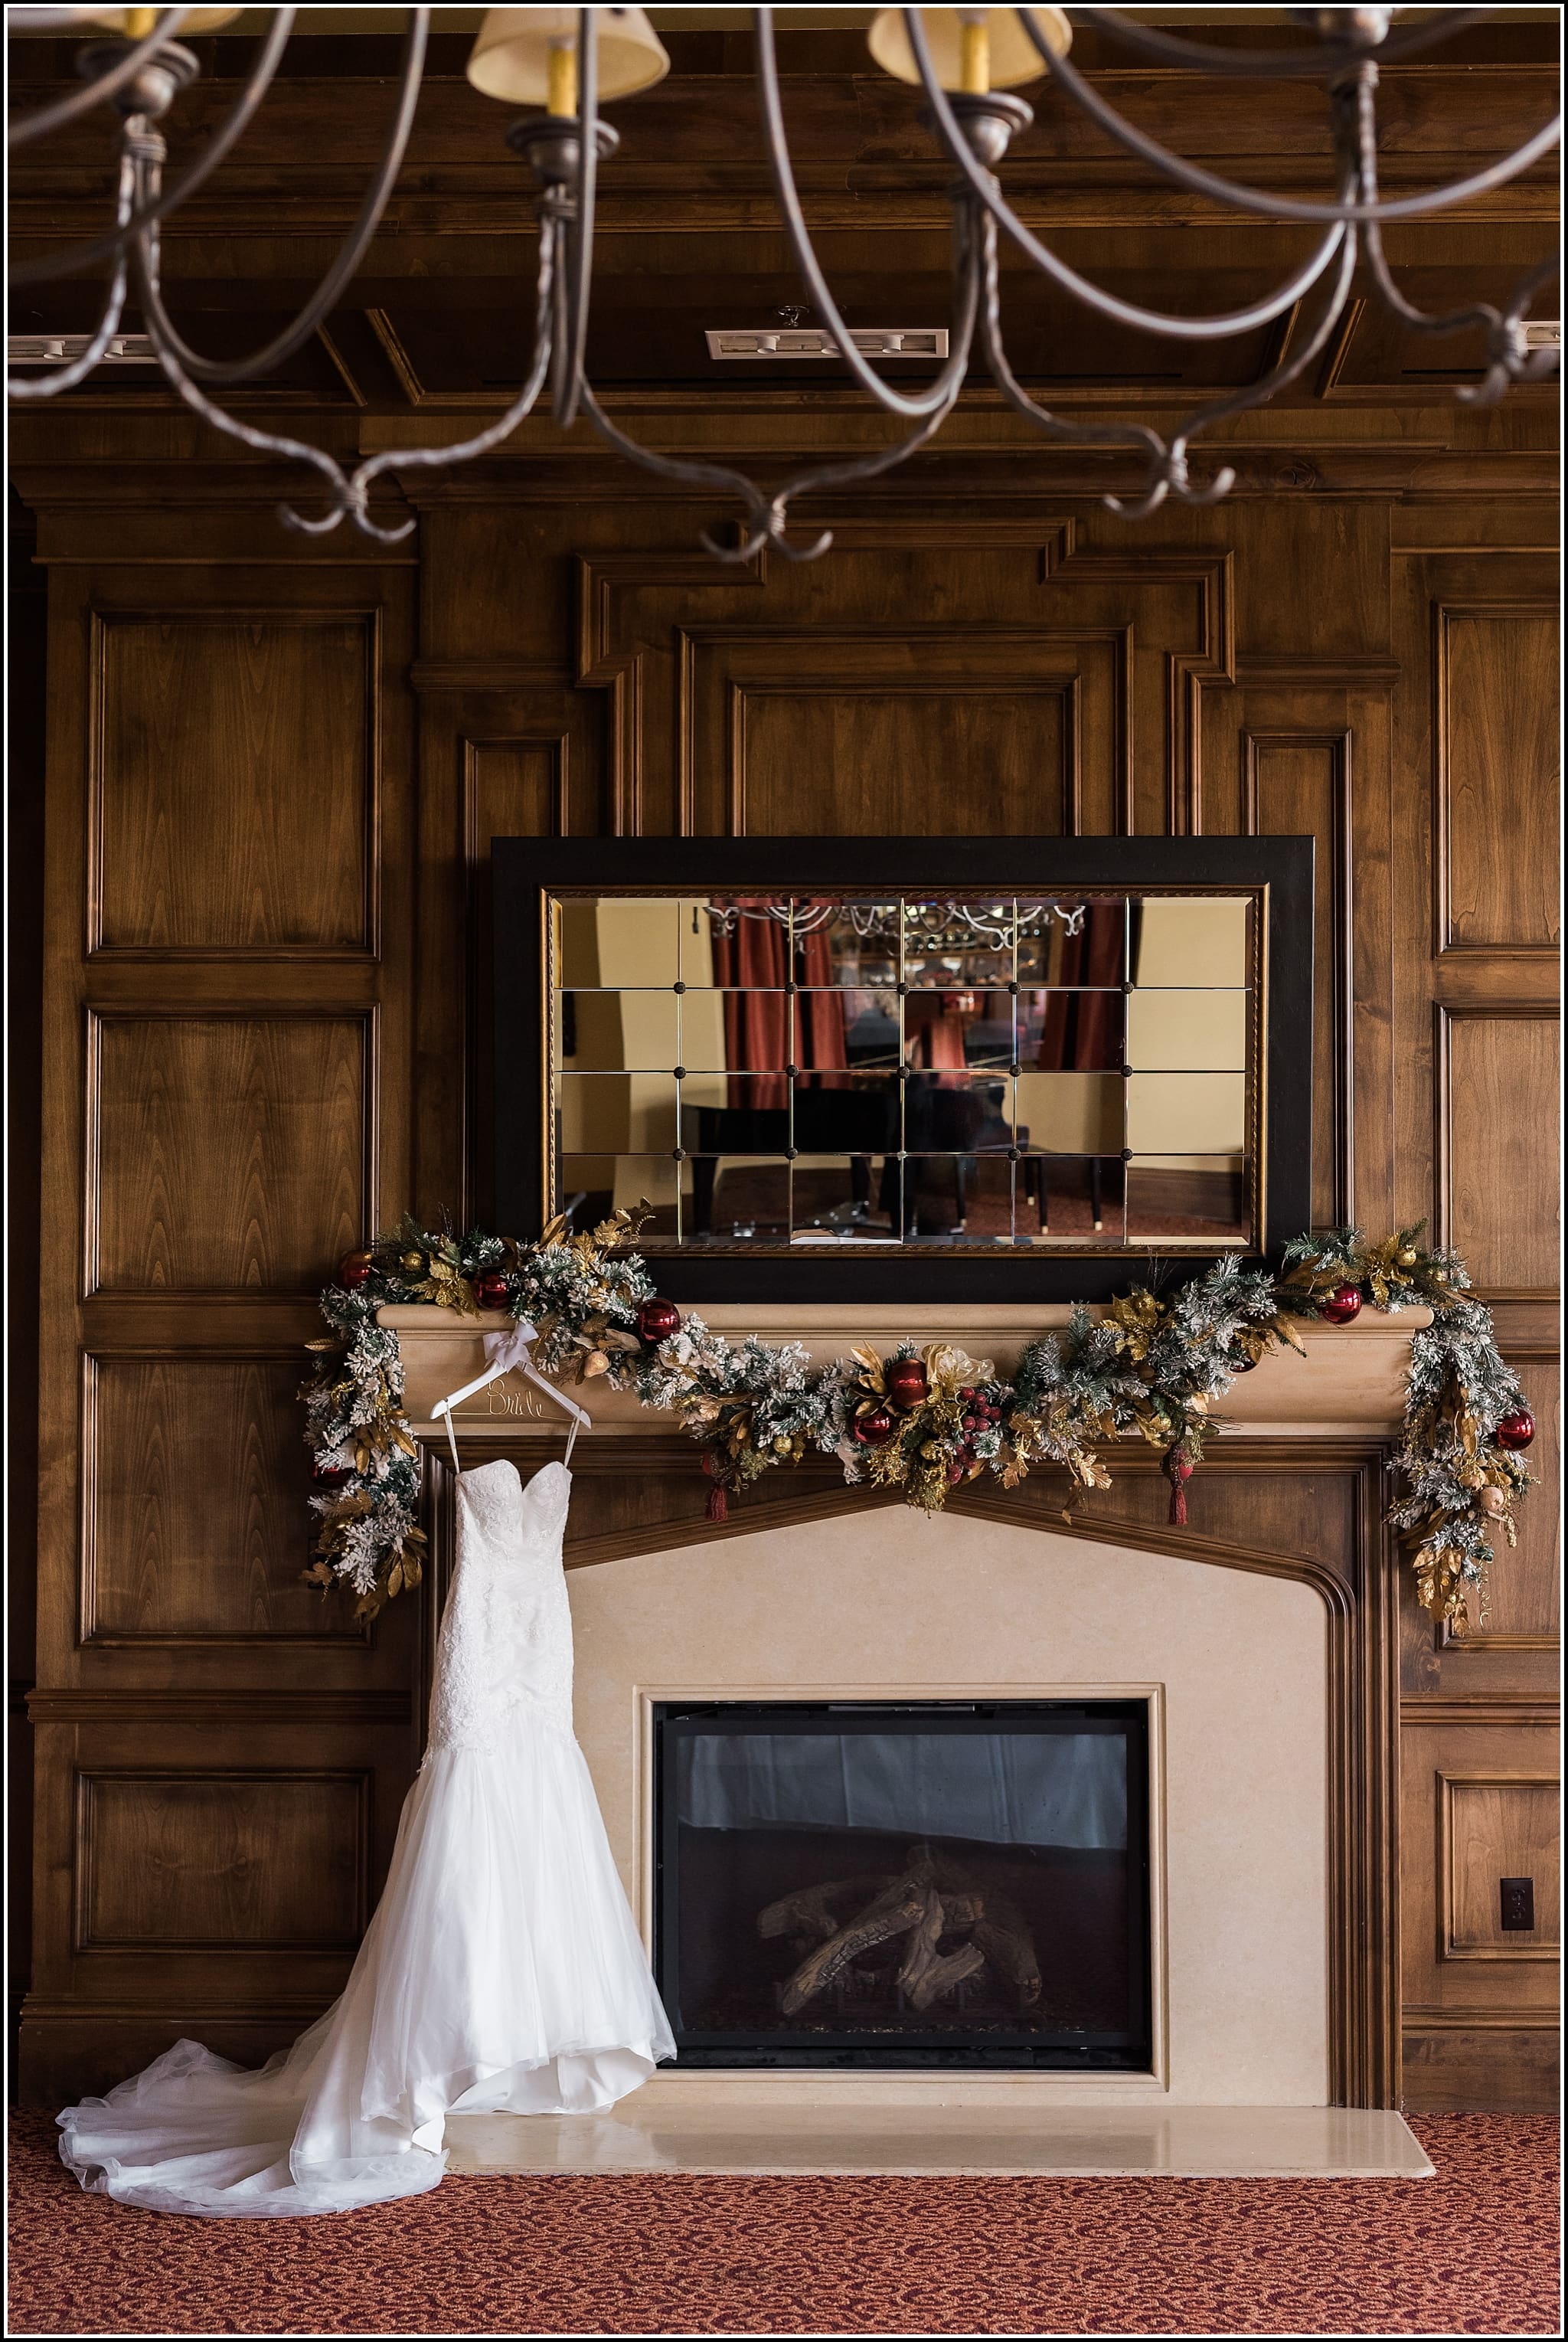  favorite wedding images 2016, wedding photos from 2016, our favorite wedding photos, christmas wedding, christimas wedding photos, bridal gown, fireplace wedding